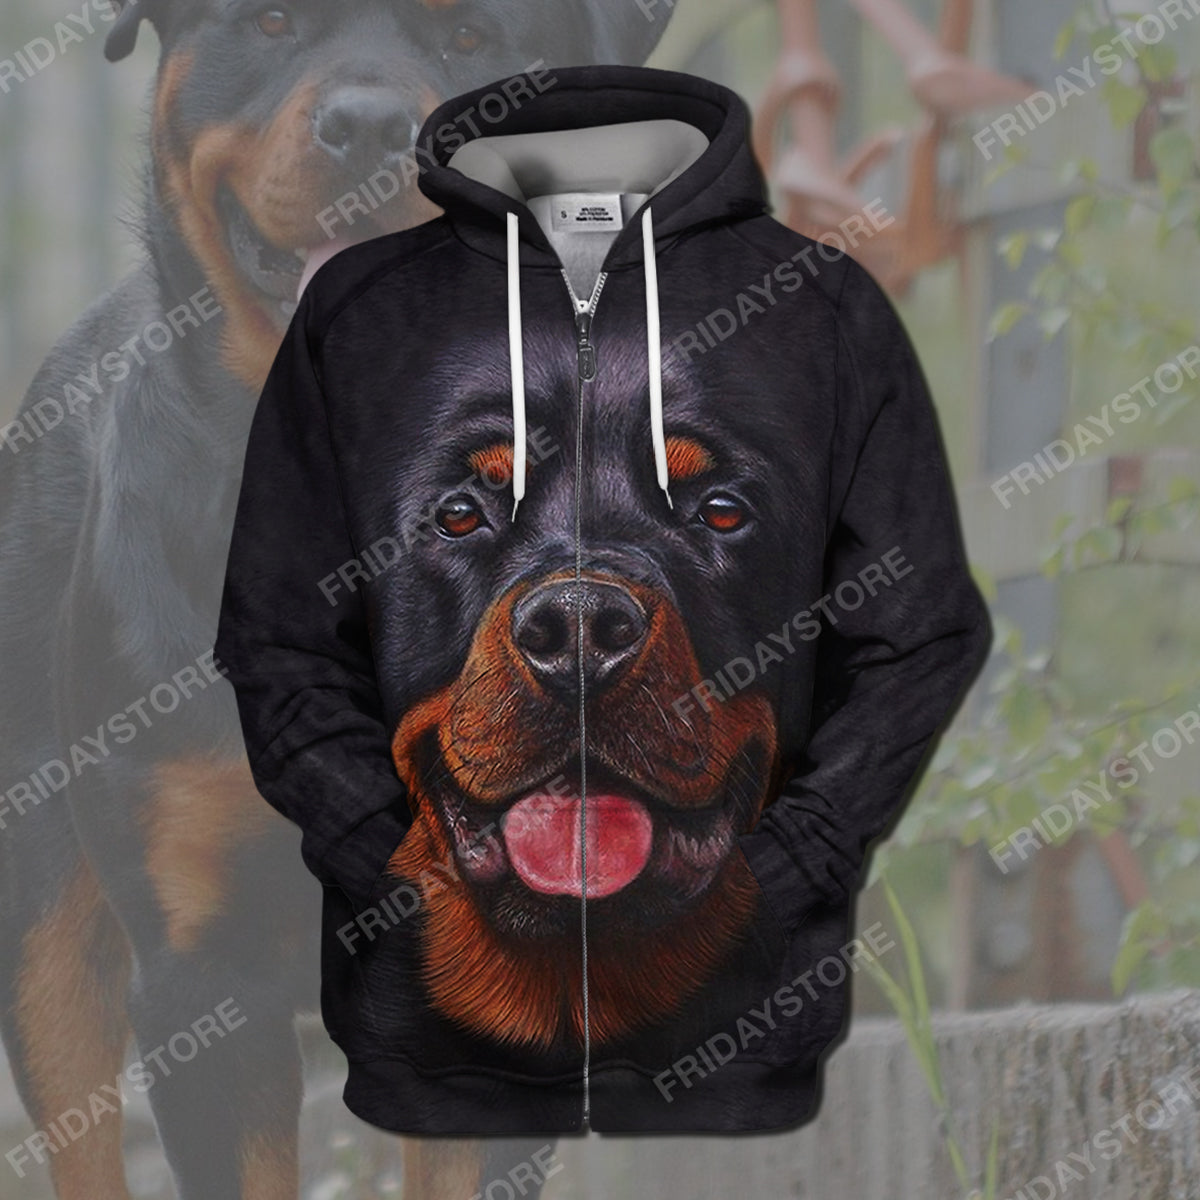 Unifinz Dog Hoodie Rottweiler Hoodie Rottweiler Dog Graphic T Shirt Awesome Dog Shirt Sweater Tank Apparel For Dog Lovers 2026